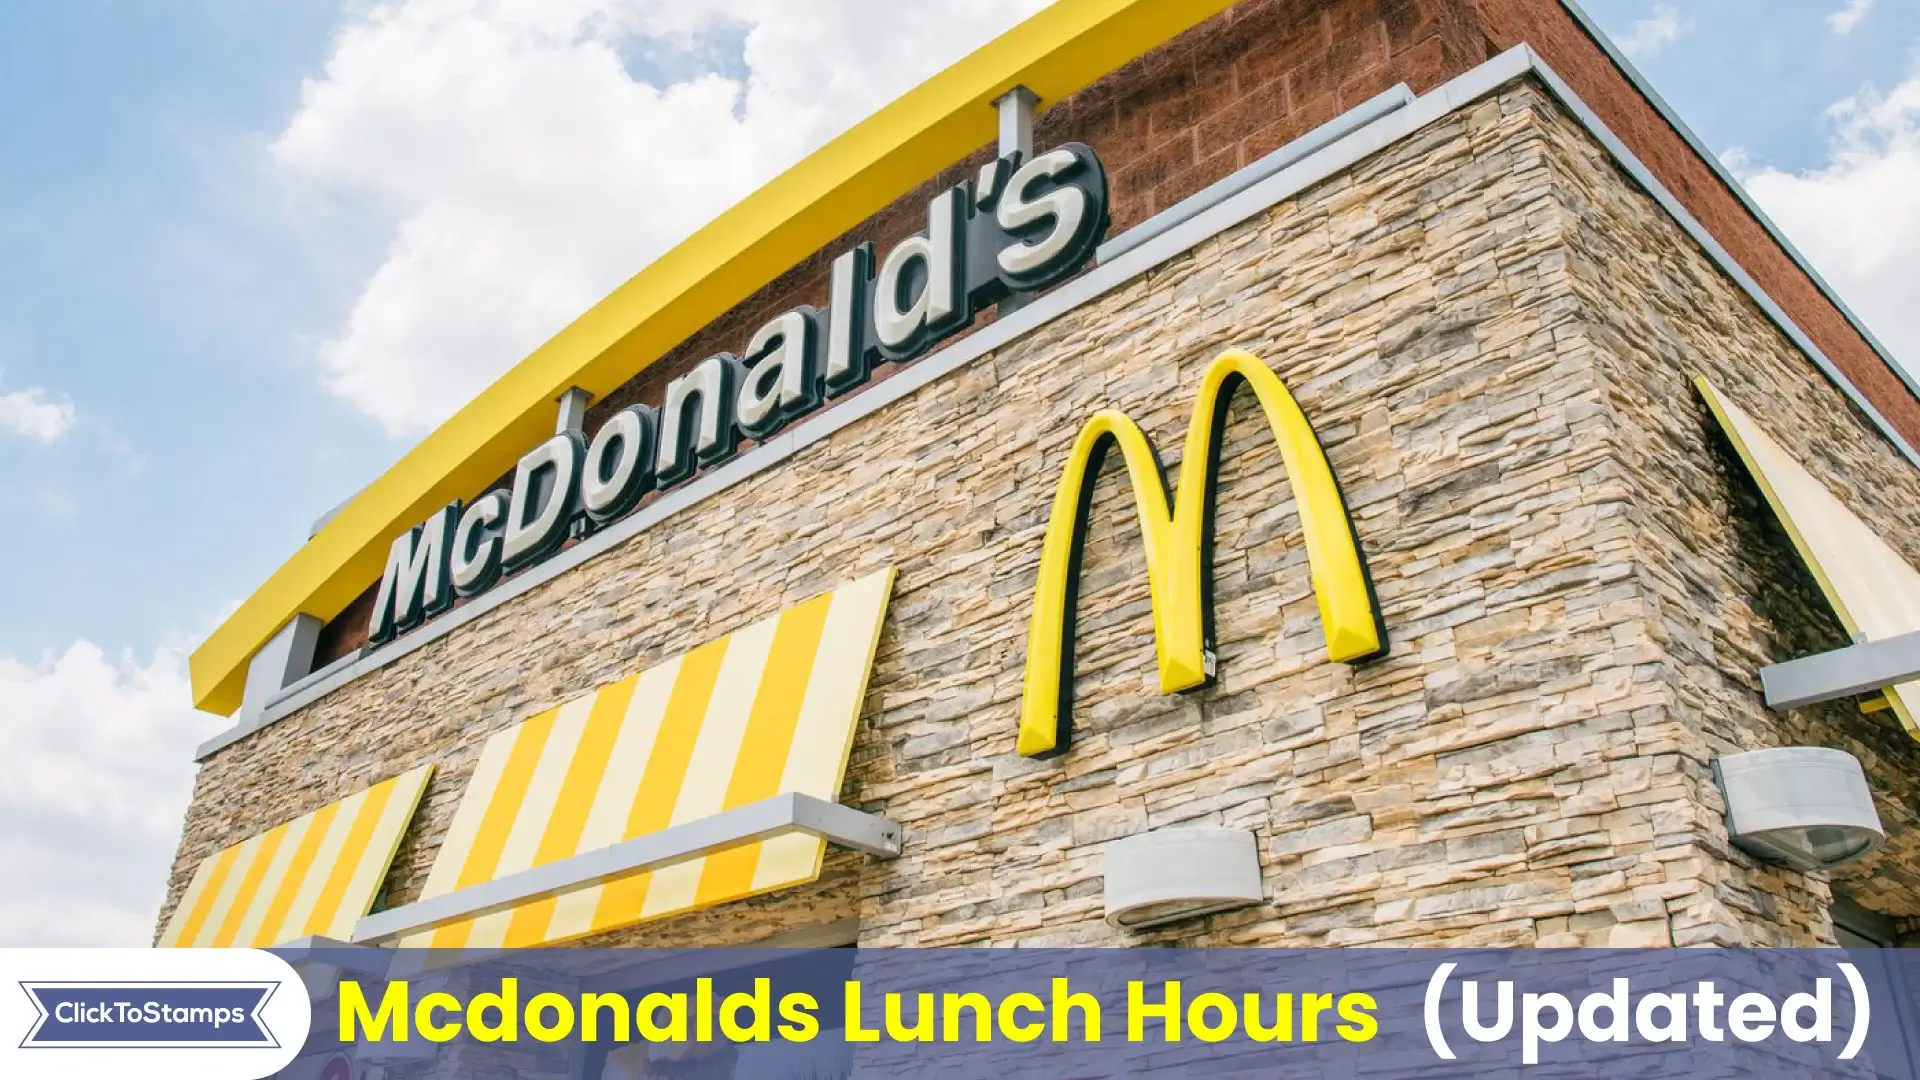 When Does Mcdonald's Start Serving Lunch